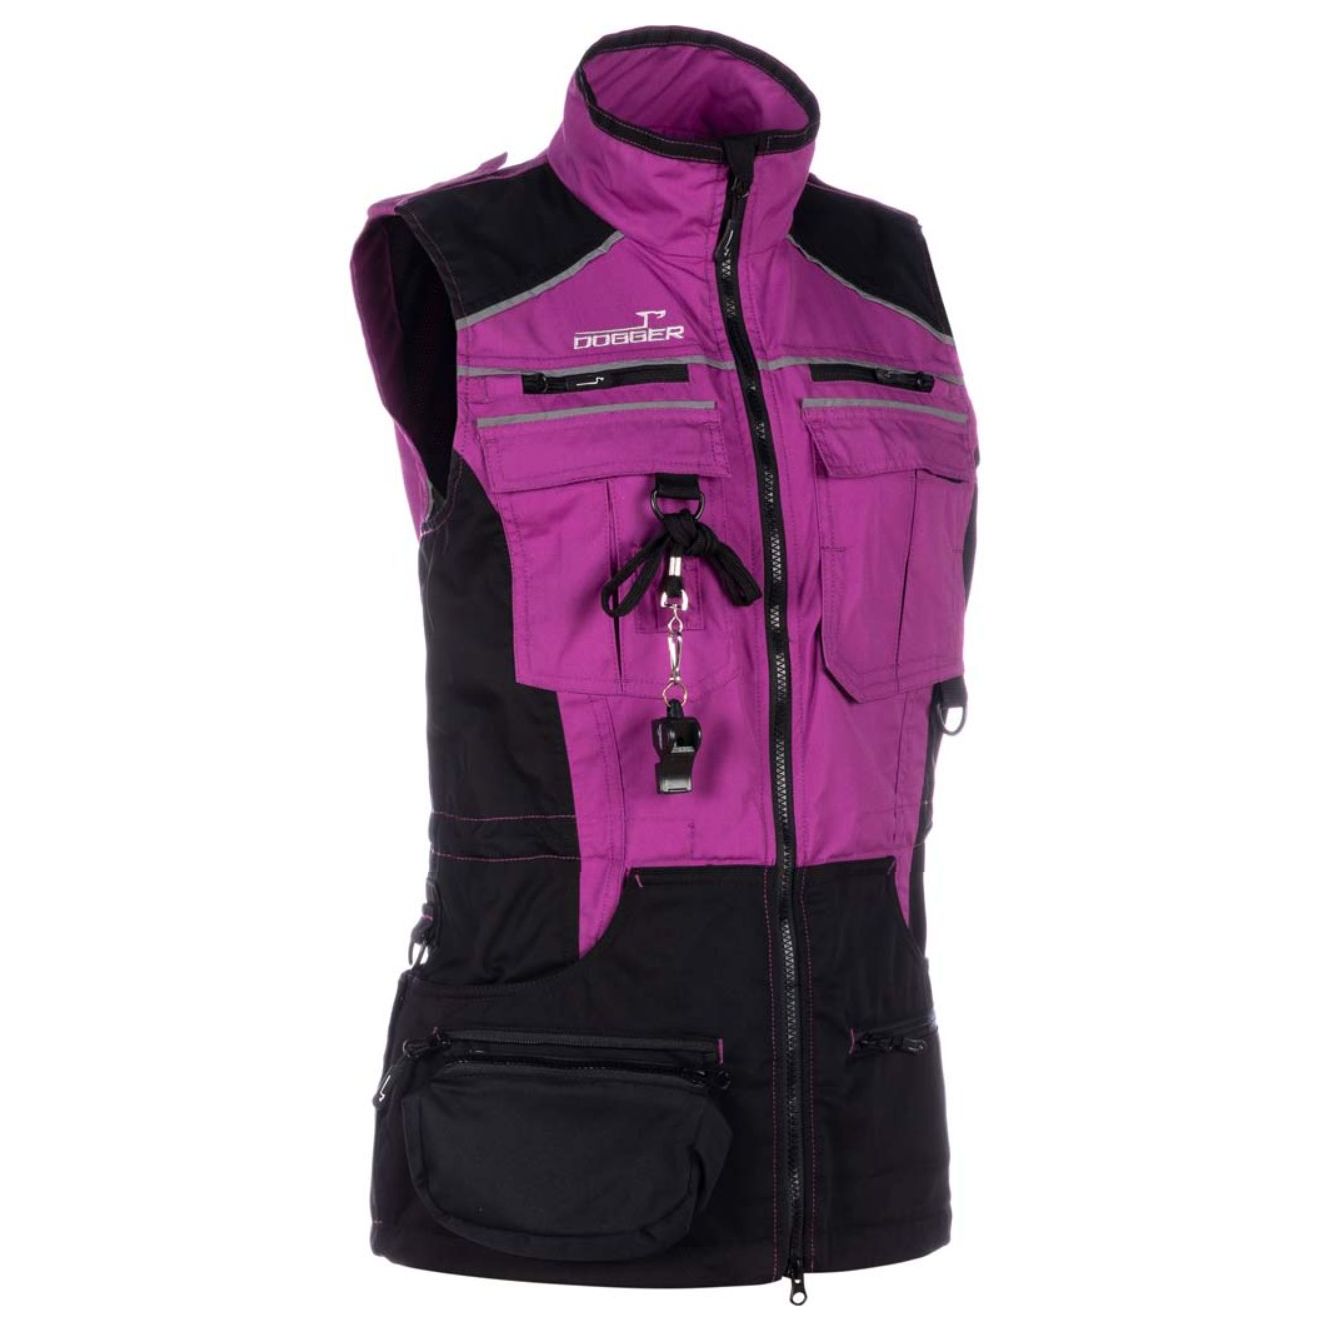 Dog handler ladies vest New Dog Sports from Pinewood.